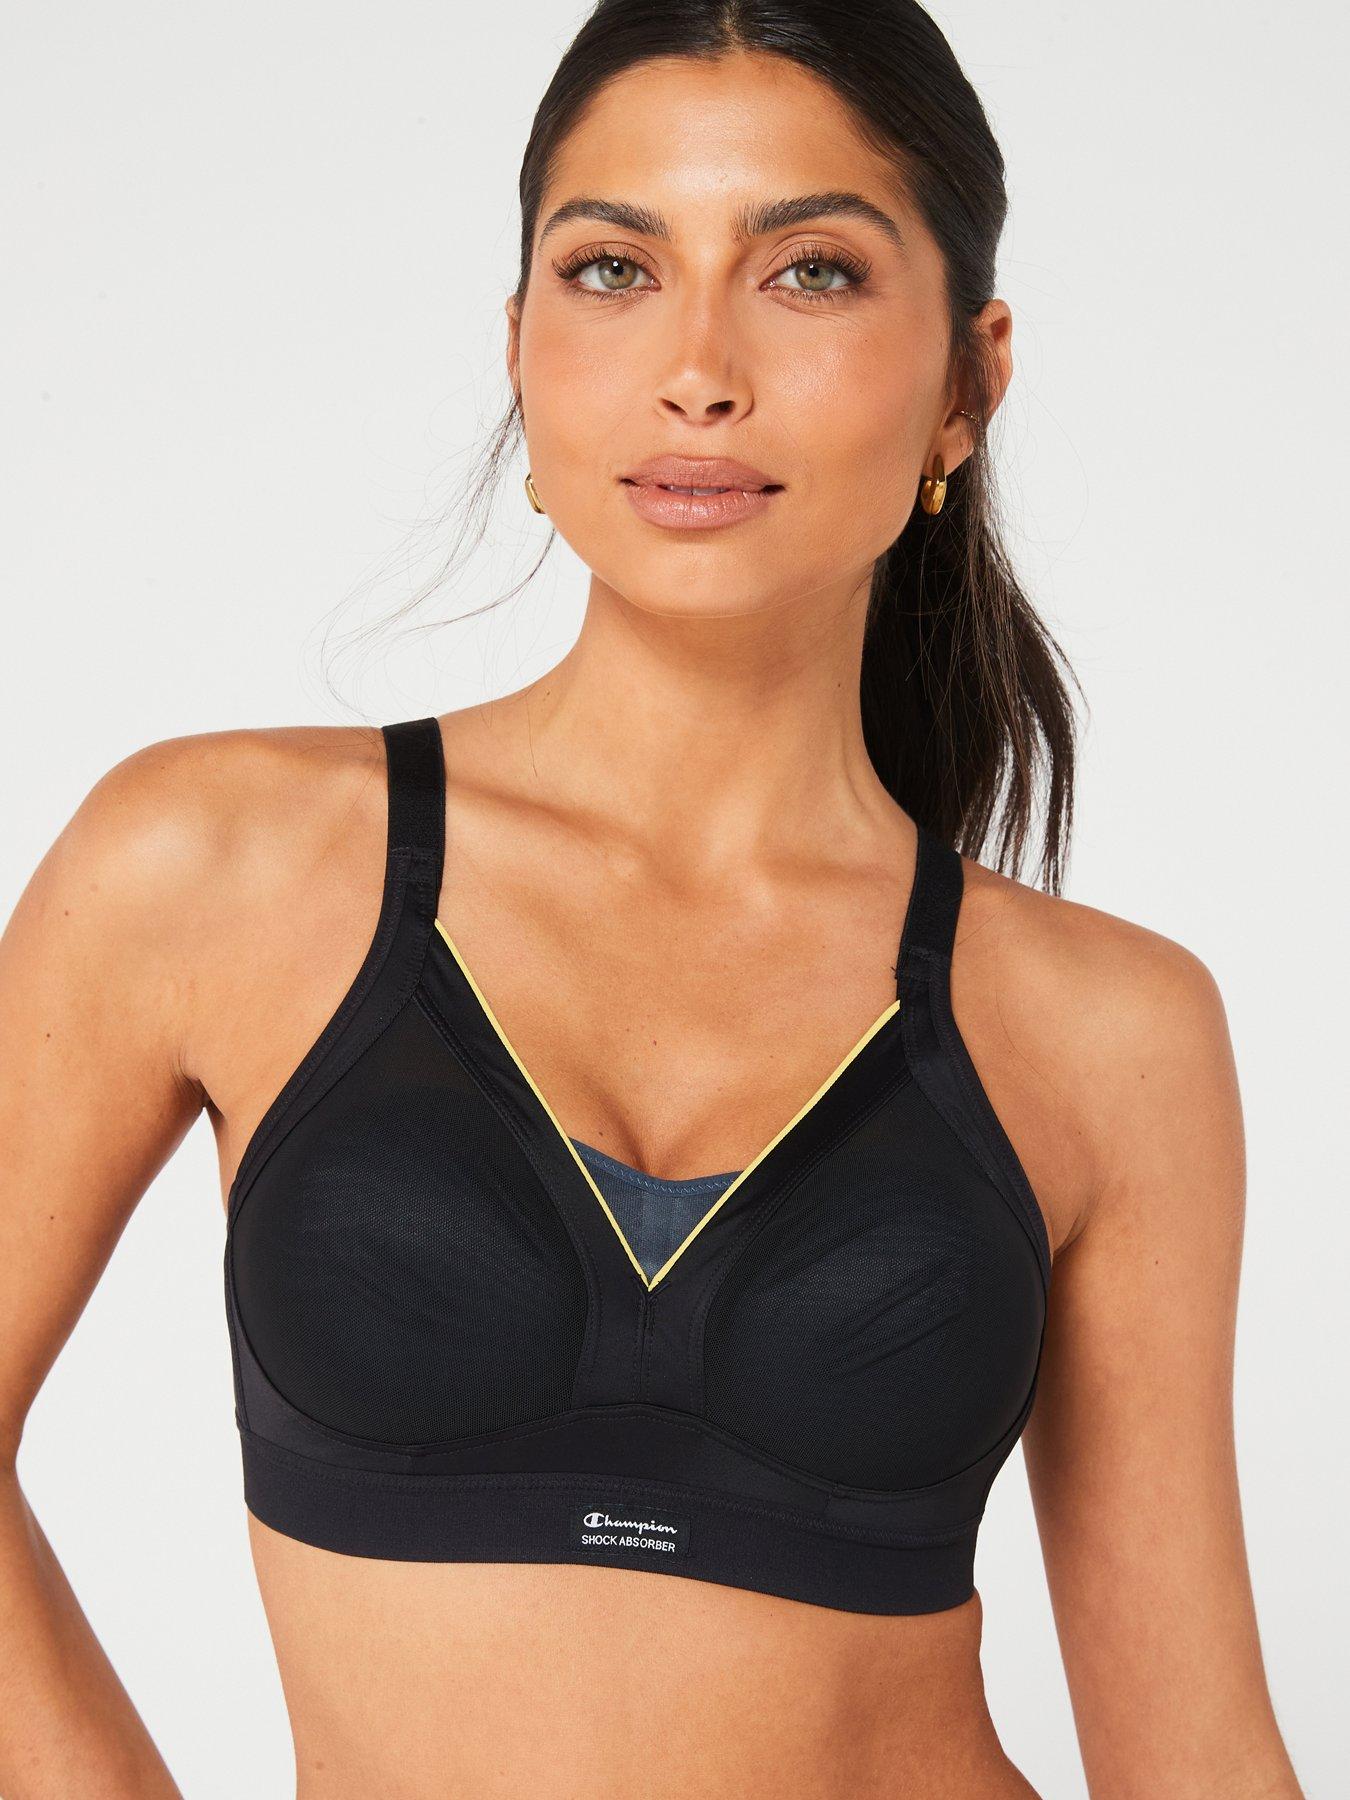 Shock Absorber Active Shaped Support Bra